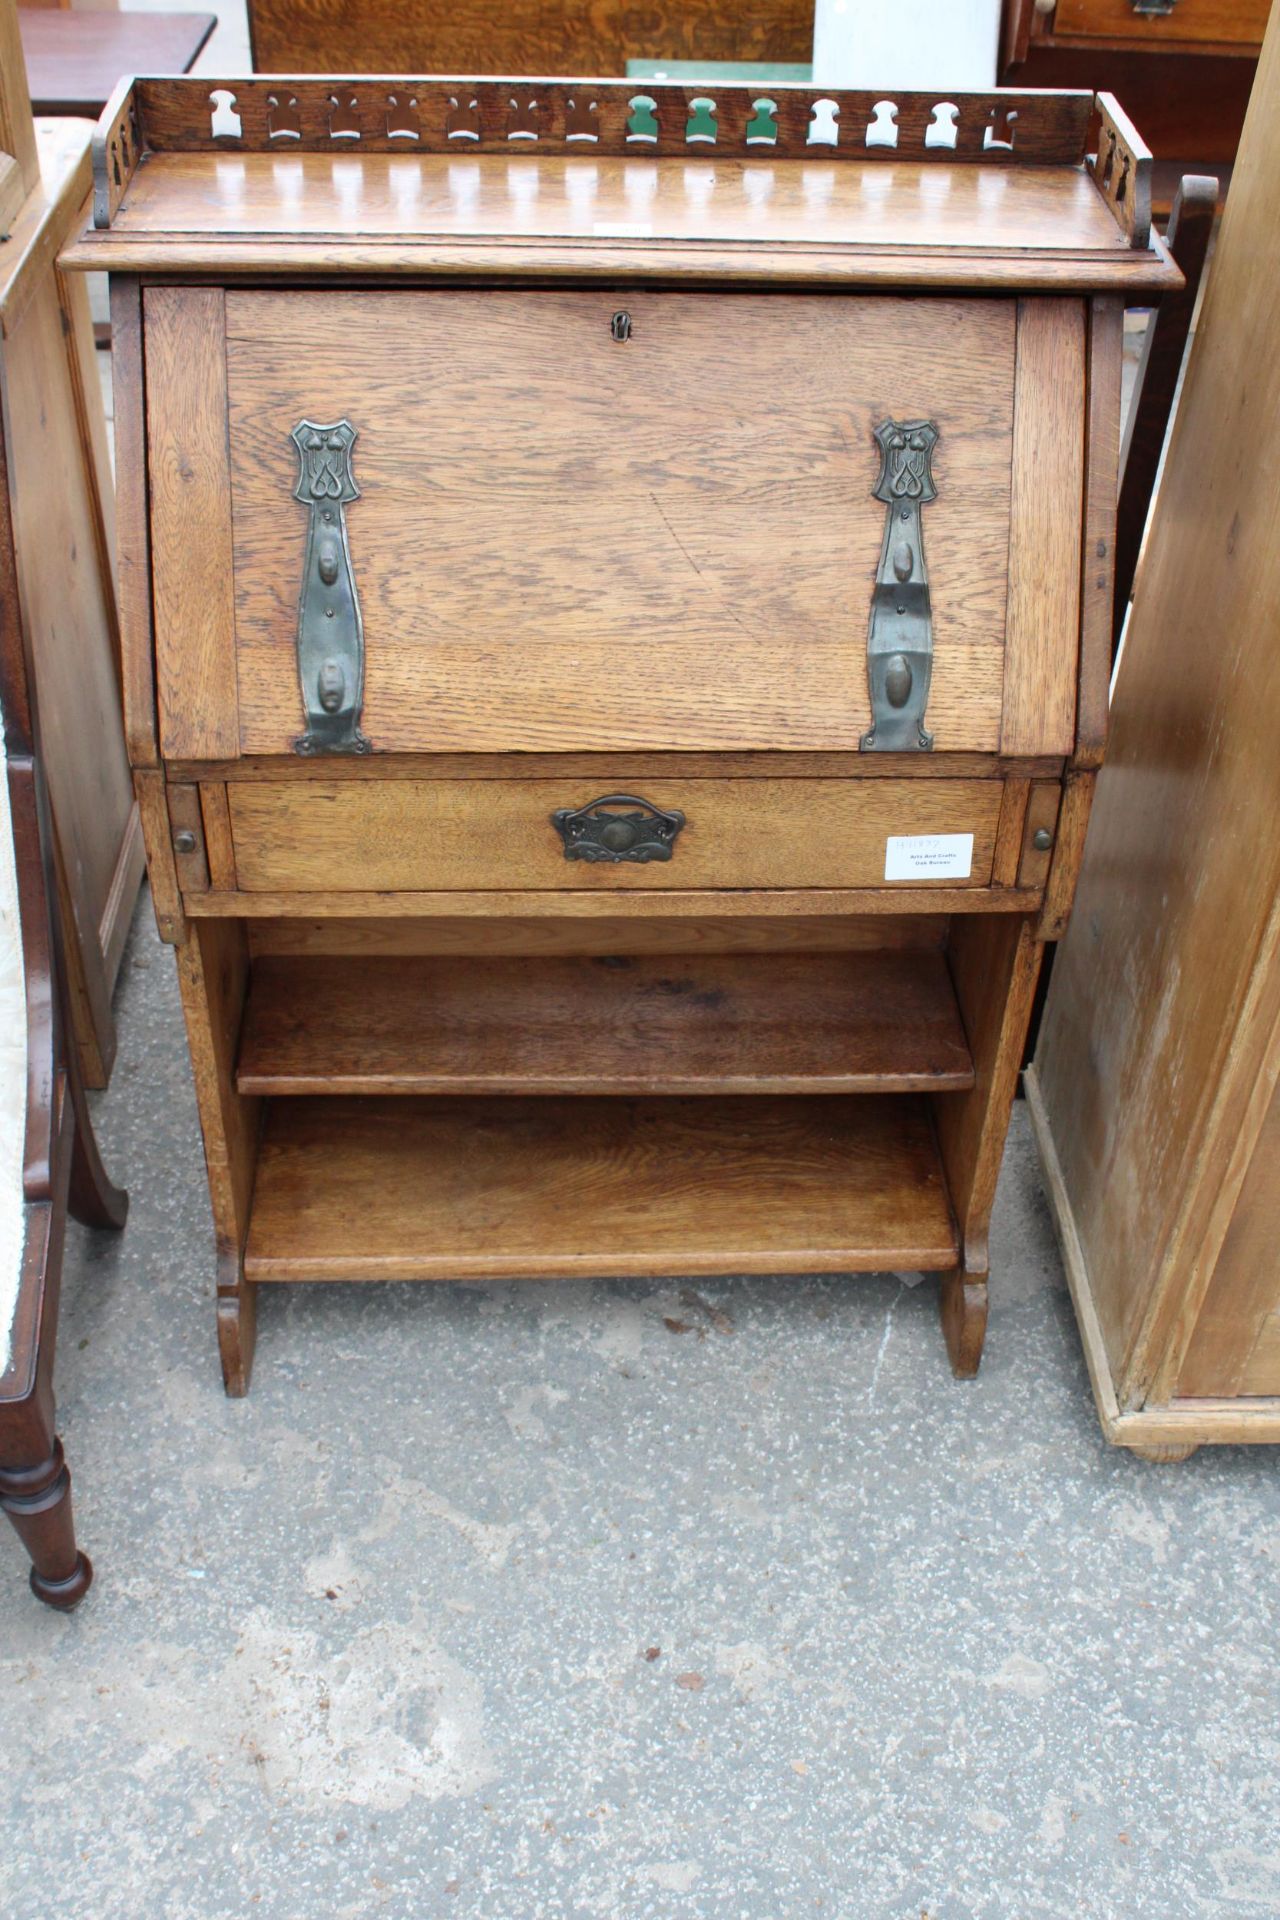 AN OAK ARTS AND CRAFTS BUREAU WITH GALLERY BACK AND OPEN BASE, 30" WIDE